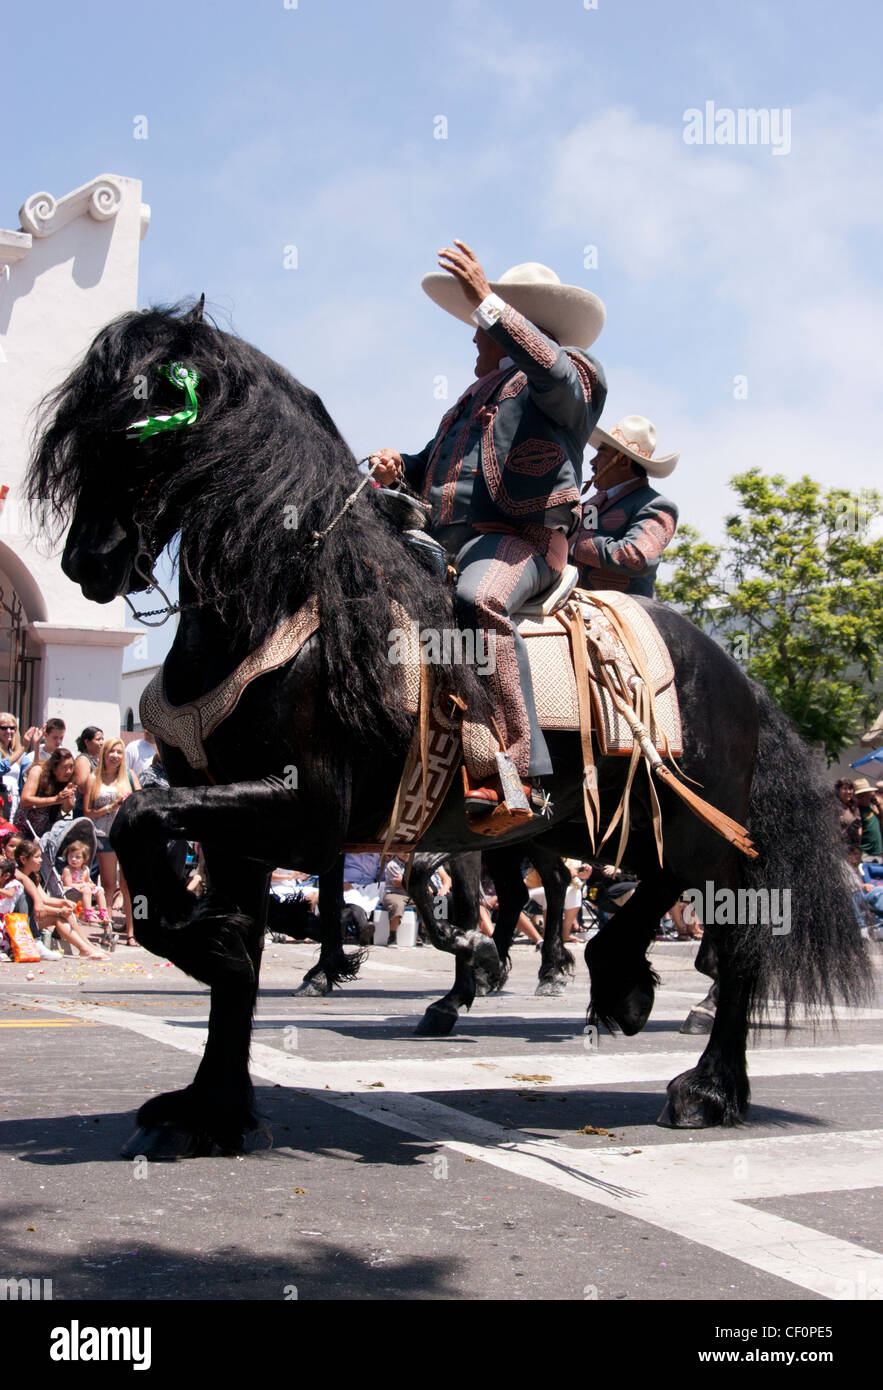 Man riding a Spanish horse  waving to the crowd Stock Photo